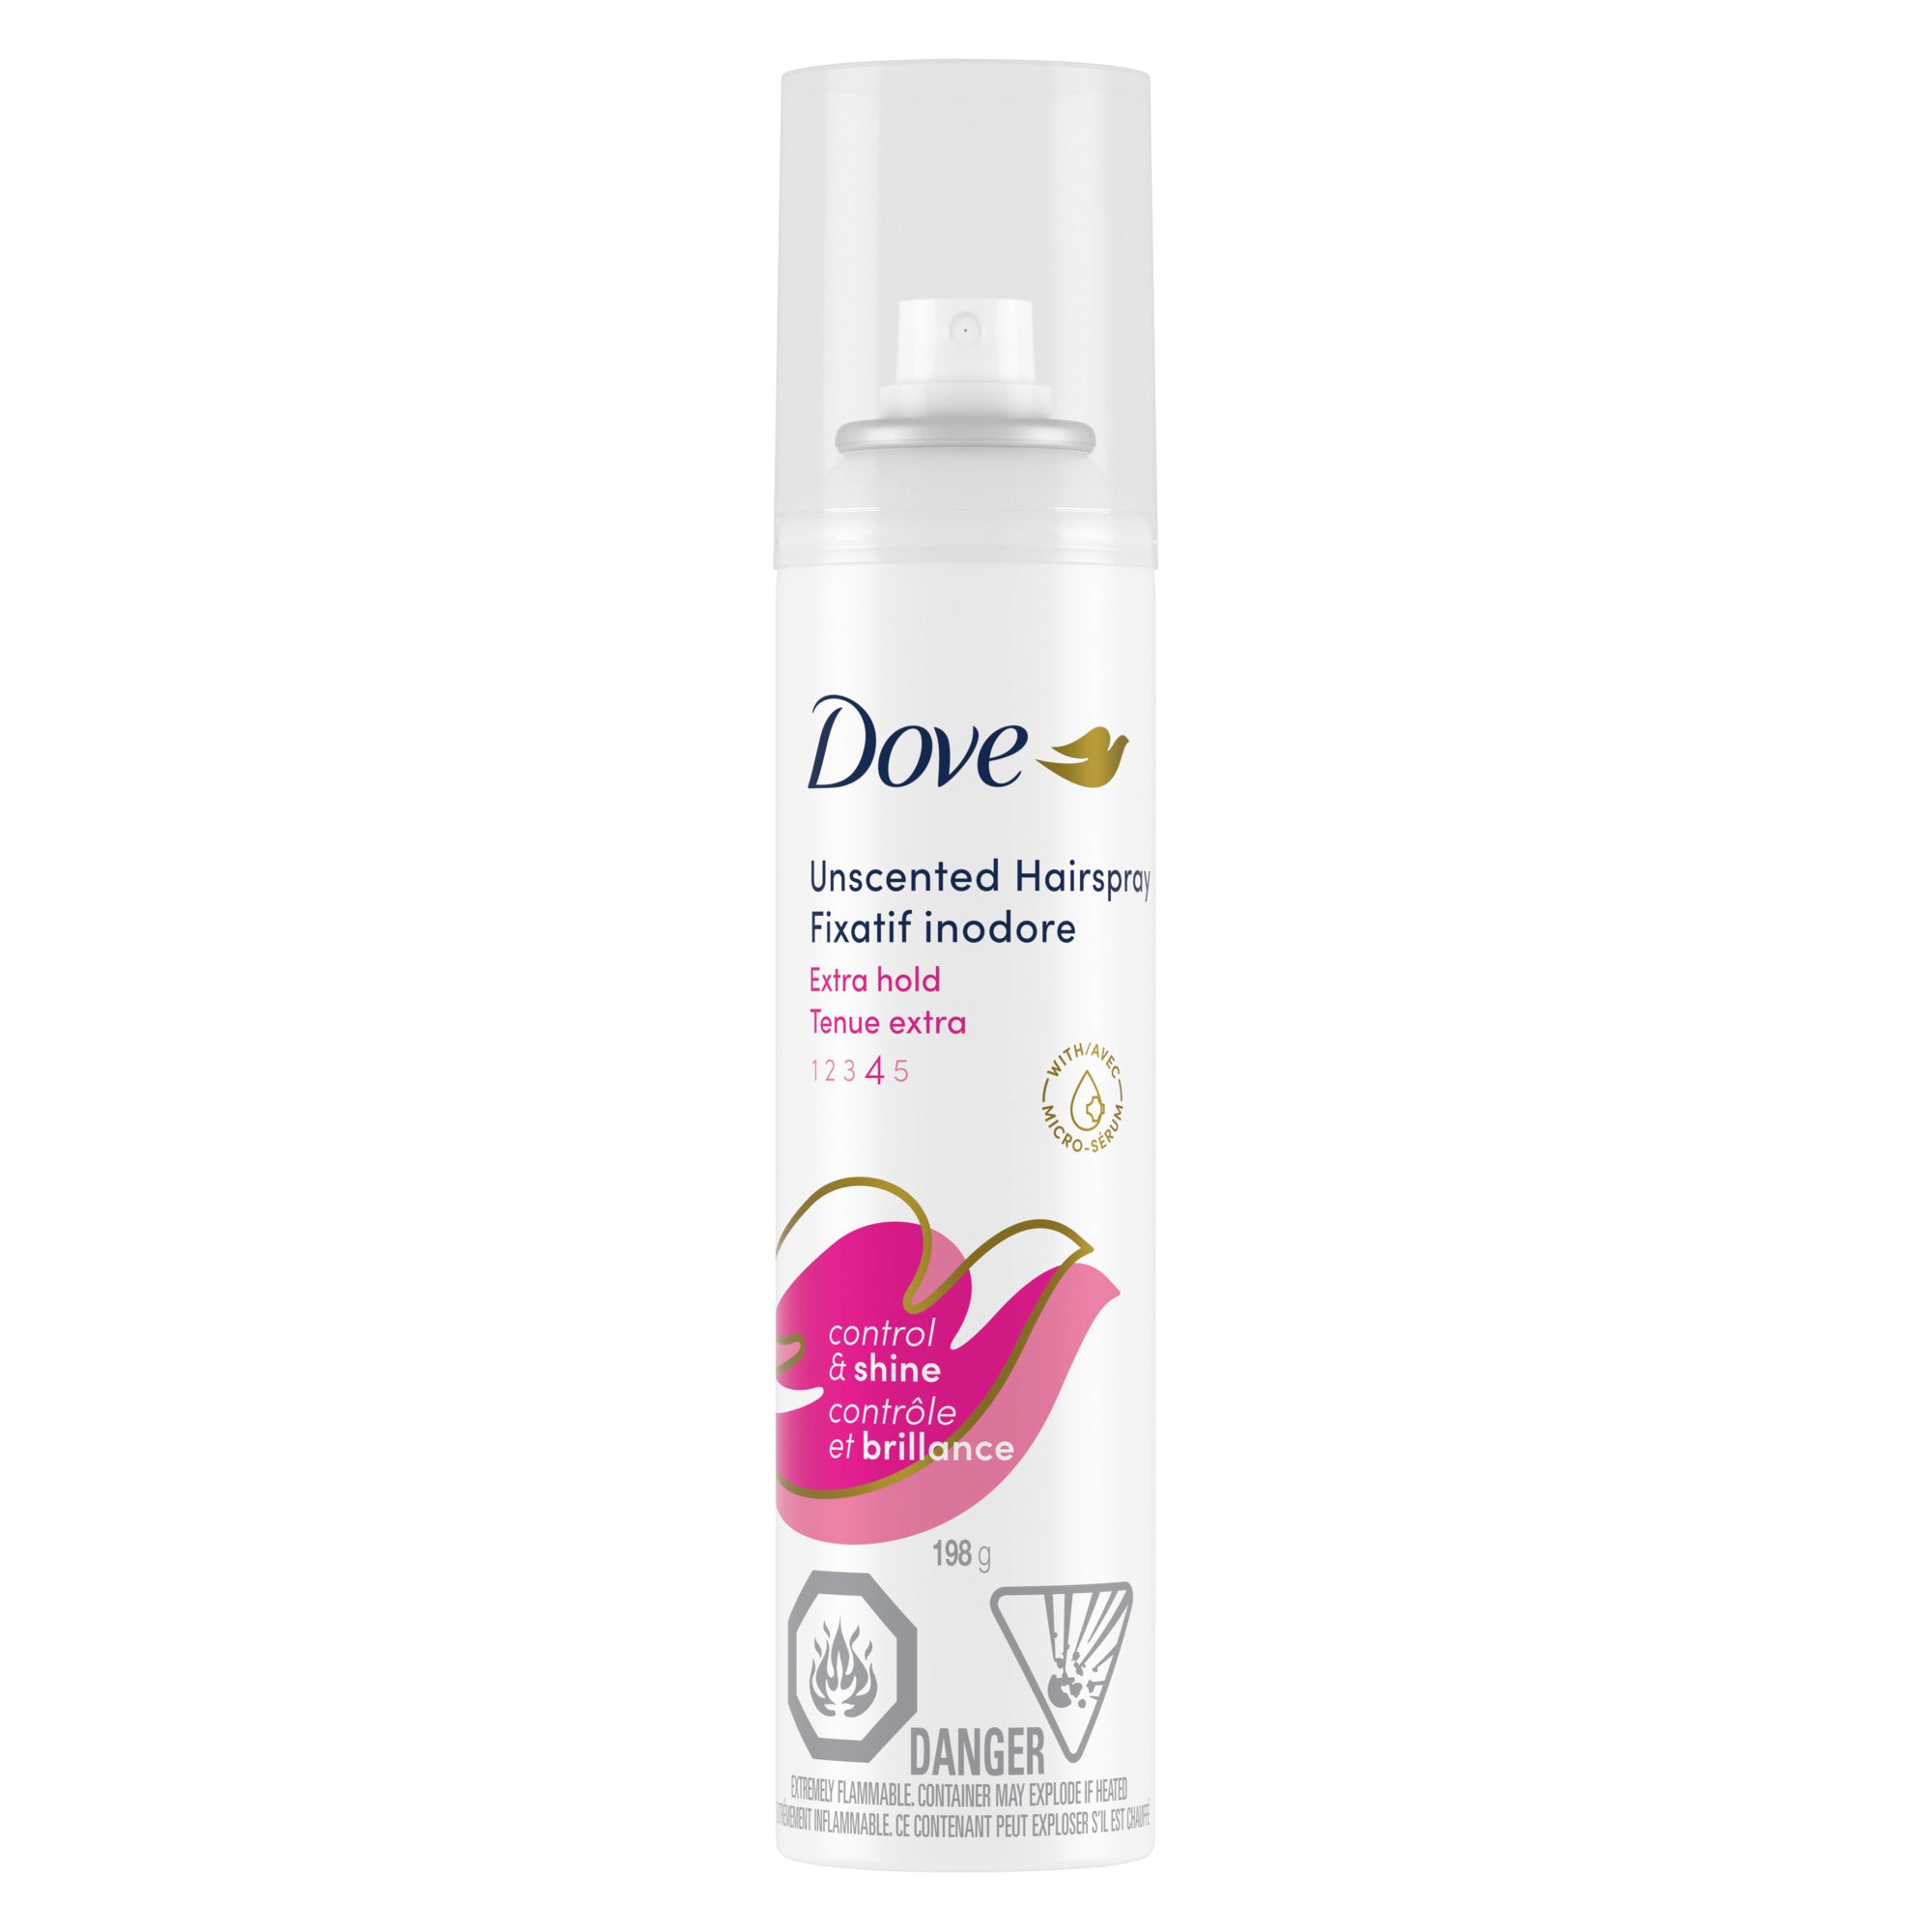 Front view of the Dove Unscented Extra Hold Hair Spray 198g pink and white product canister.